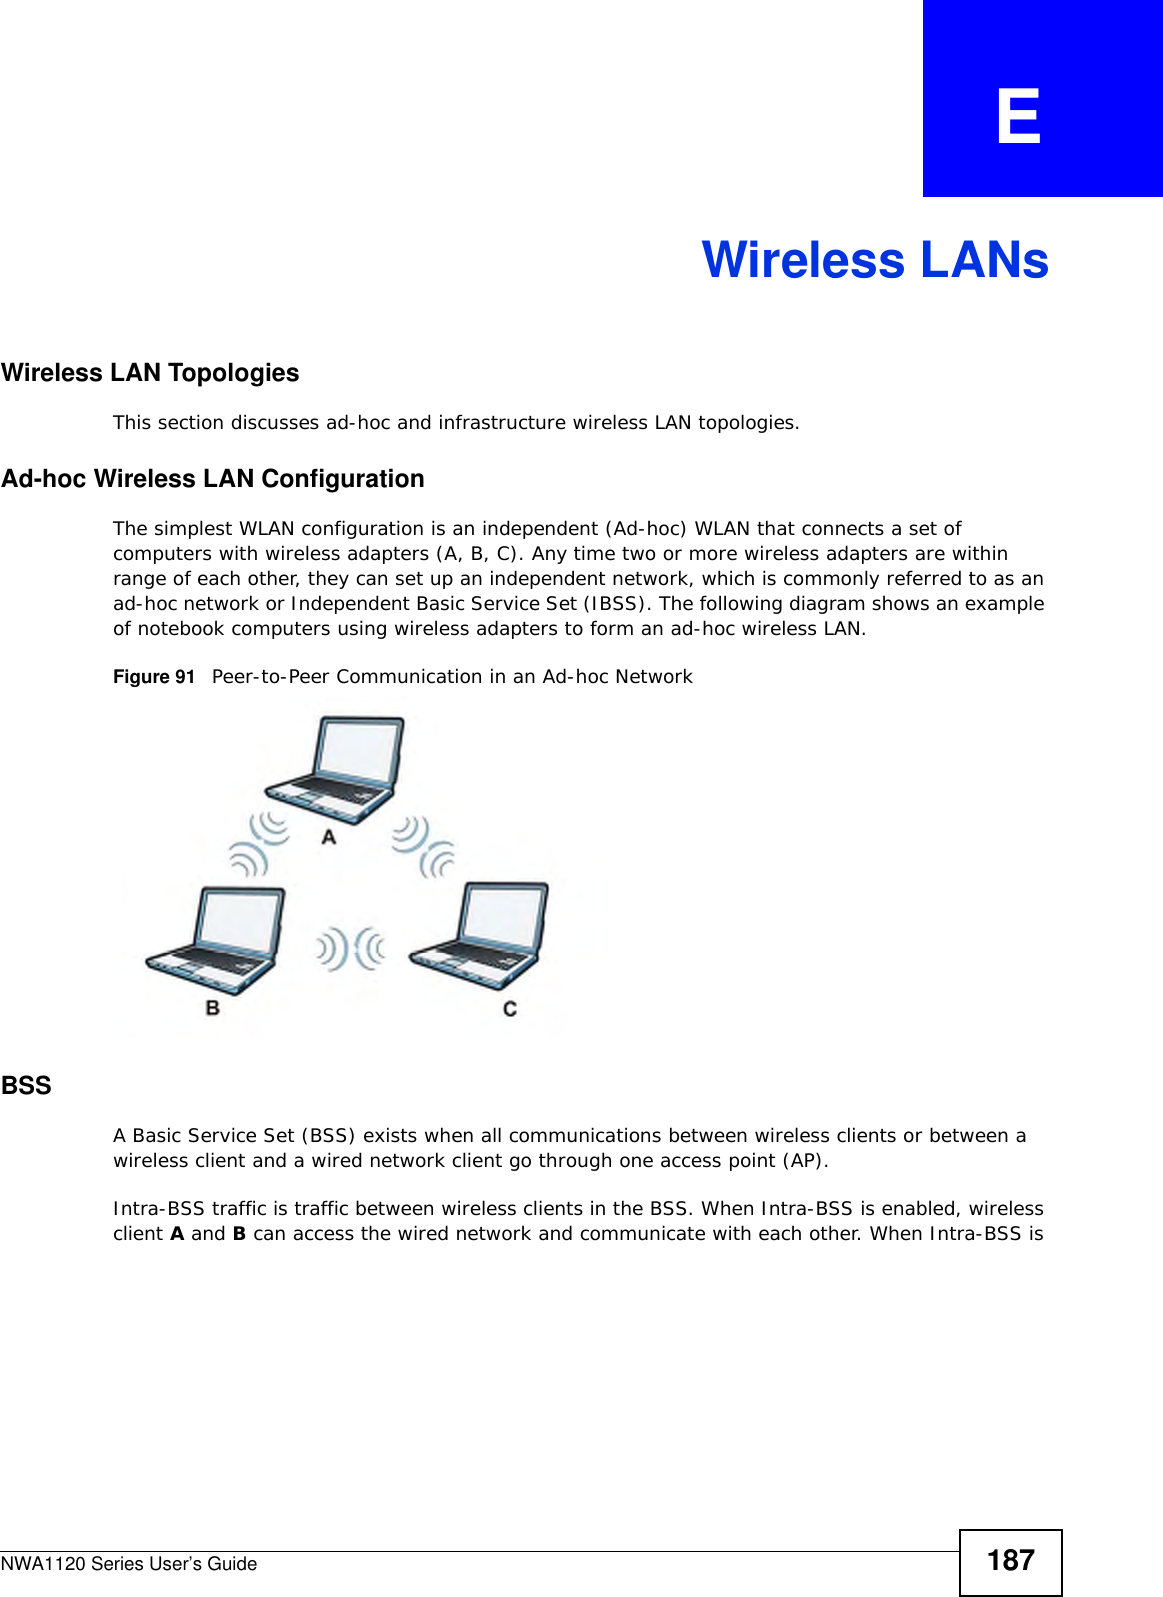 NWA1120 Series User’s Guide 187APPENDIX   EWireless LANsWireless LAN TopologiesThis section discusses ad-hoc and infrastructure wireless LAN topologies.Ad-hoc Wireless LAN ConfigurationThe simplest WLAN configuration is an independent (Ad-hoc) WLAN that connects a set of computers with wireless adapters (A, B, C). Any time two or more wireless adapters are within range of each other, they can set up an independent network, which is commonly referred to as an ad-hoc network or Independent Basic Service Set (IBSS). The following diagram shows an example of notebook computers using wireless adapters to form an ad-hoc wireless LAN. Figure 91   Peer-to-Peer Communication in an Ad-hoc NetworkBSSA Basic Service Set (BSS) exists when all communications between wireless clients or between a wireless client and a wired network client go through one access point (AP). Intra-BSS traffic is traffic between wireless clients in the BSS. When Intra-BSS is enabled, wireless client A and B can access the wired network and communicate with each other. When Intra-BSS is 